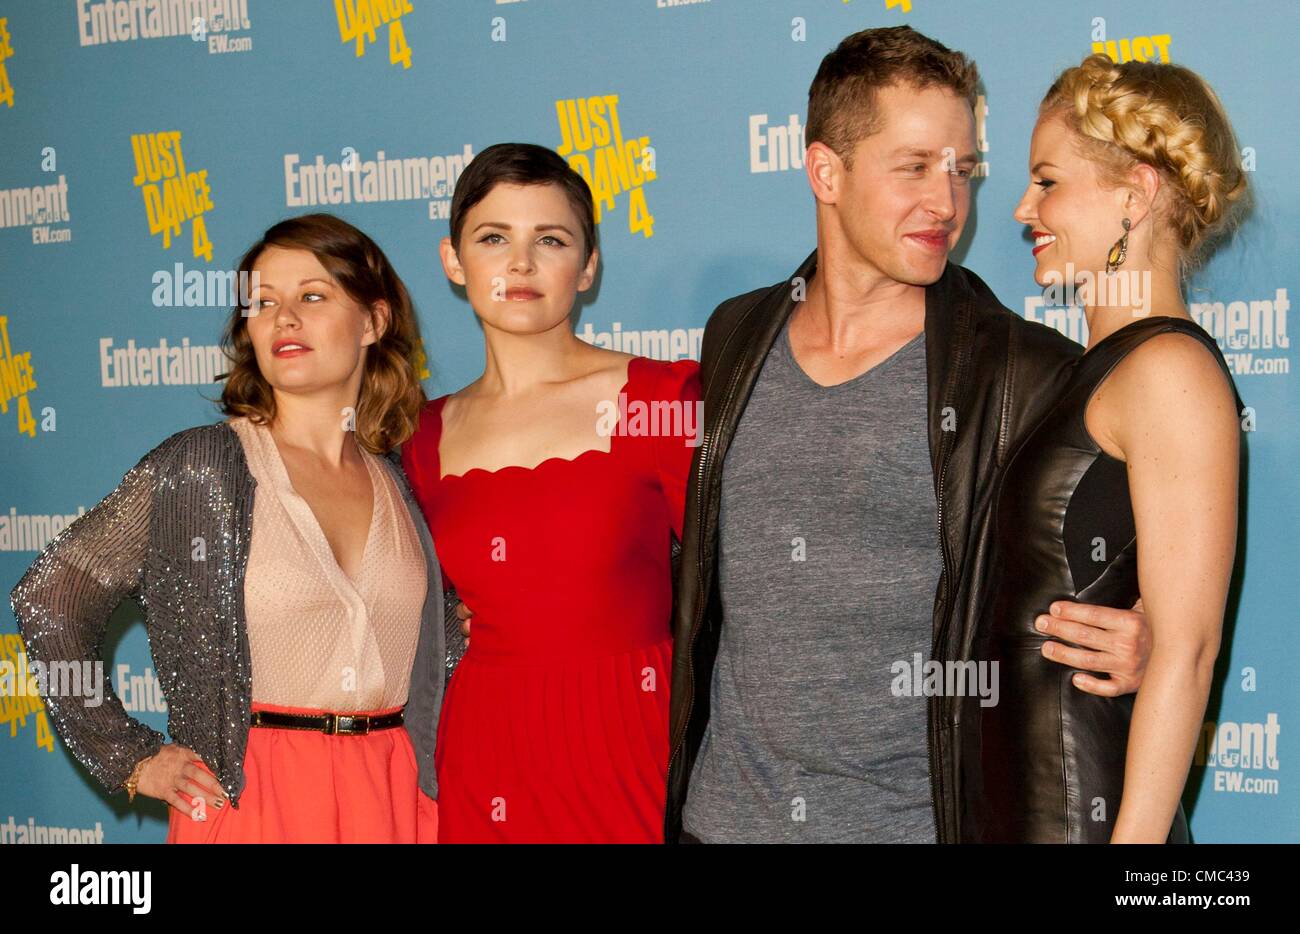 Emilie de Ravin, Ginnifer Goodwin, Josh Dallas, Jennifer Morrison at arrivals for Comic-Con International 2012: Entertainment Weekly Party, San Diego Convention Center, San Diego, CA July 14, 2012. Photo By: Emiley Schweich/Everett Collection Stock Photo